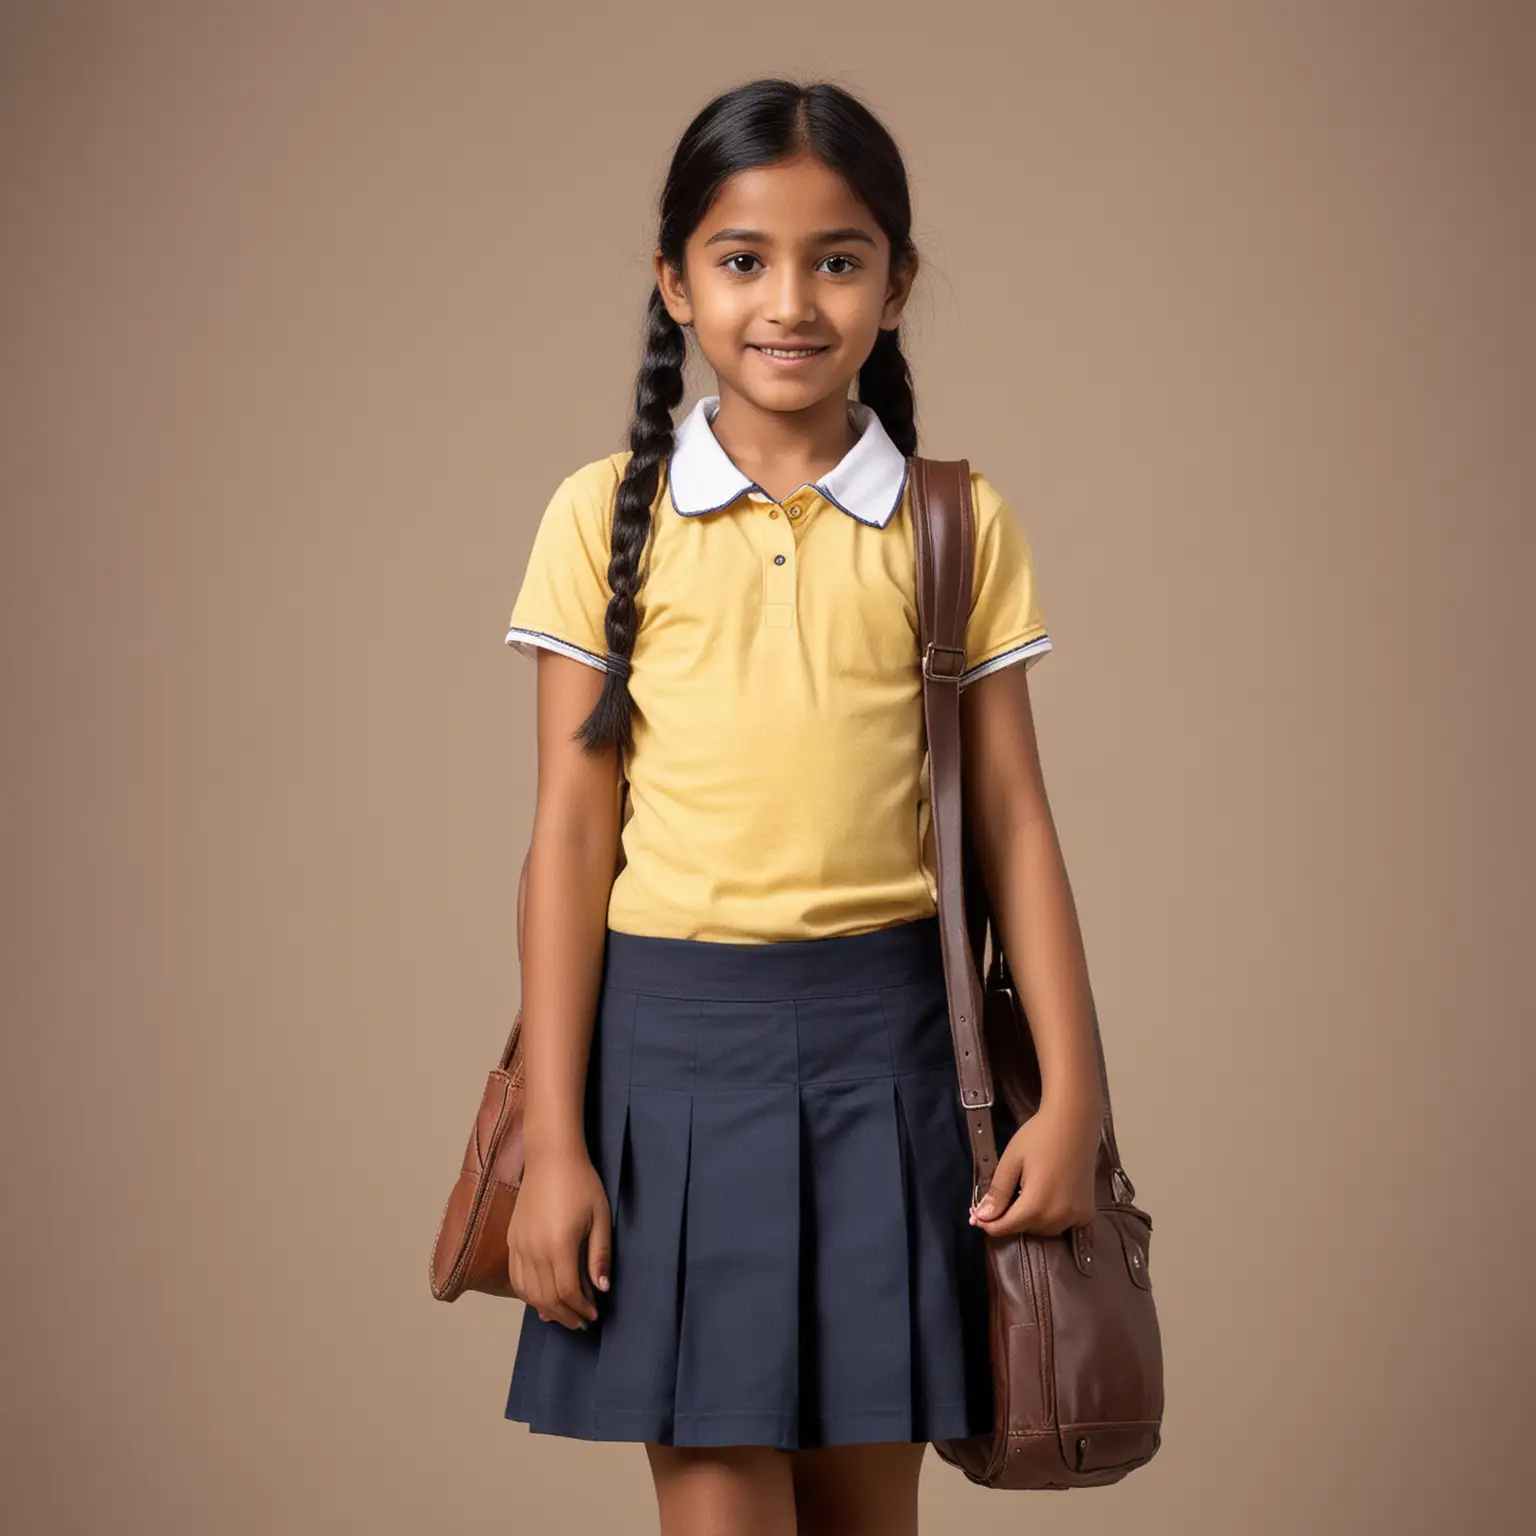 Indian-School-Girl-Standing-with-Backpack